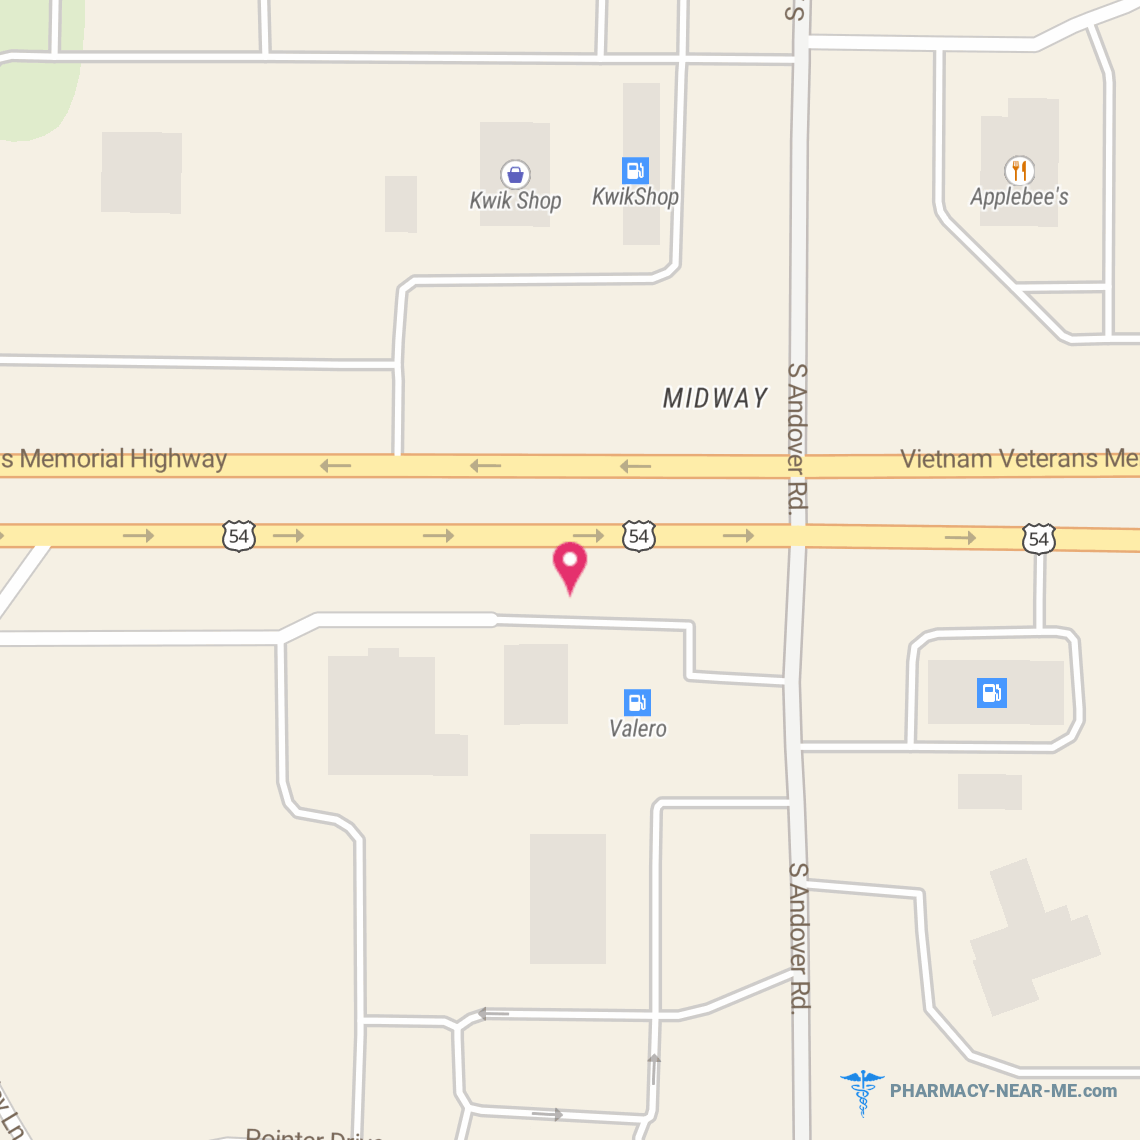 ANDOVER DRUG - Pharmacy Hours, Phone, Reviews & Information: 307 W US Highway 54, Andover, Kansas 67002, United States